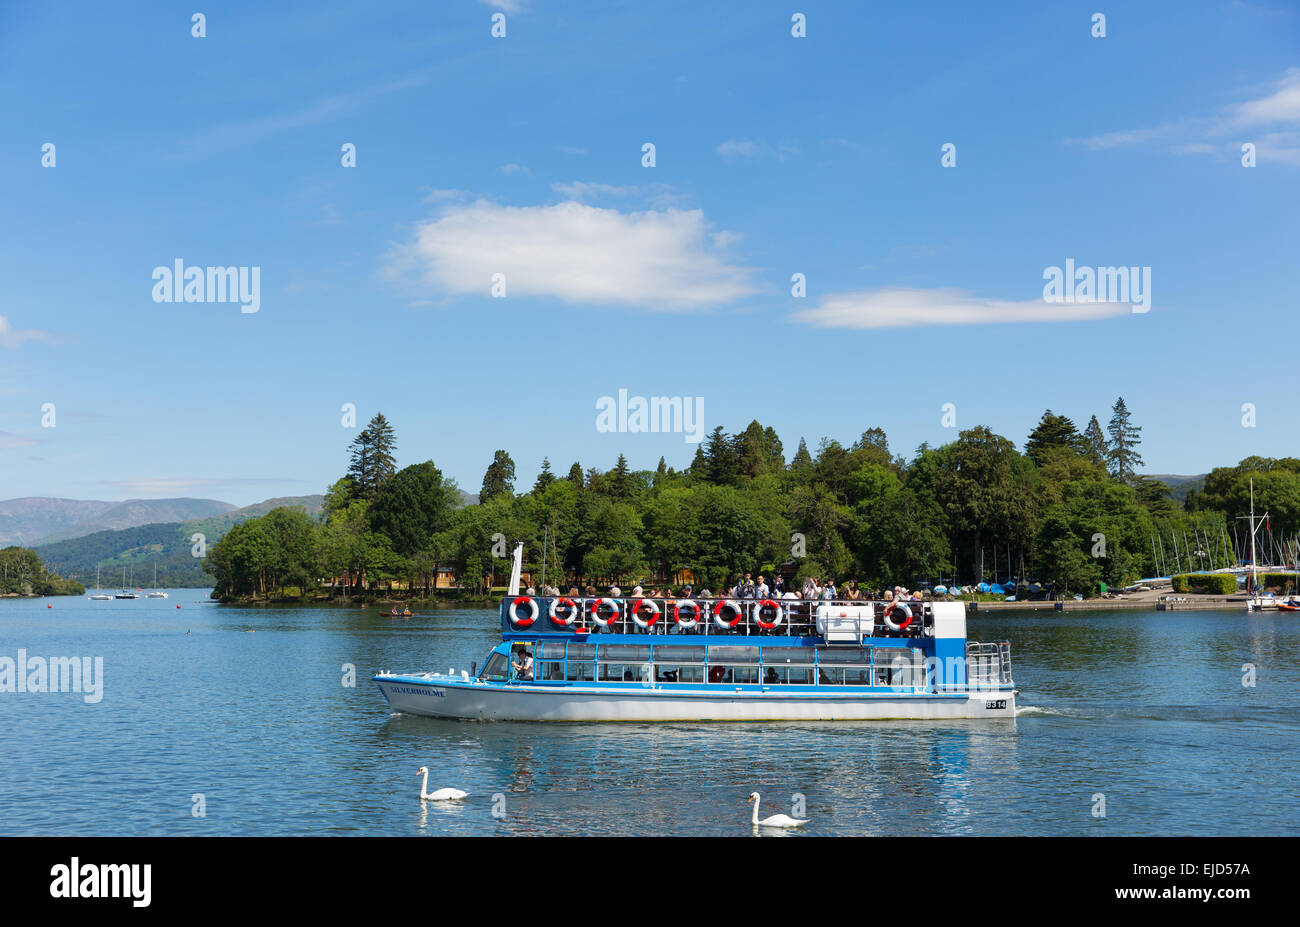 Pleasure boat Bowness on Windermere South Lakeland Cumbria UK on the banks of Lake Windermere in summer with blue sky Stock Photo